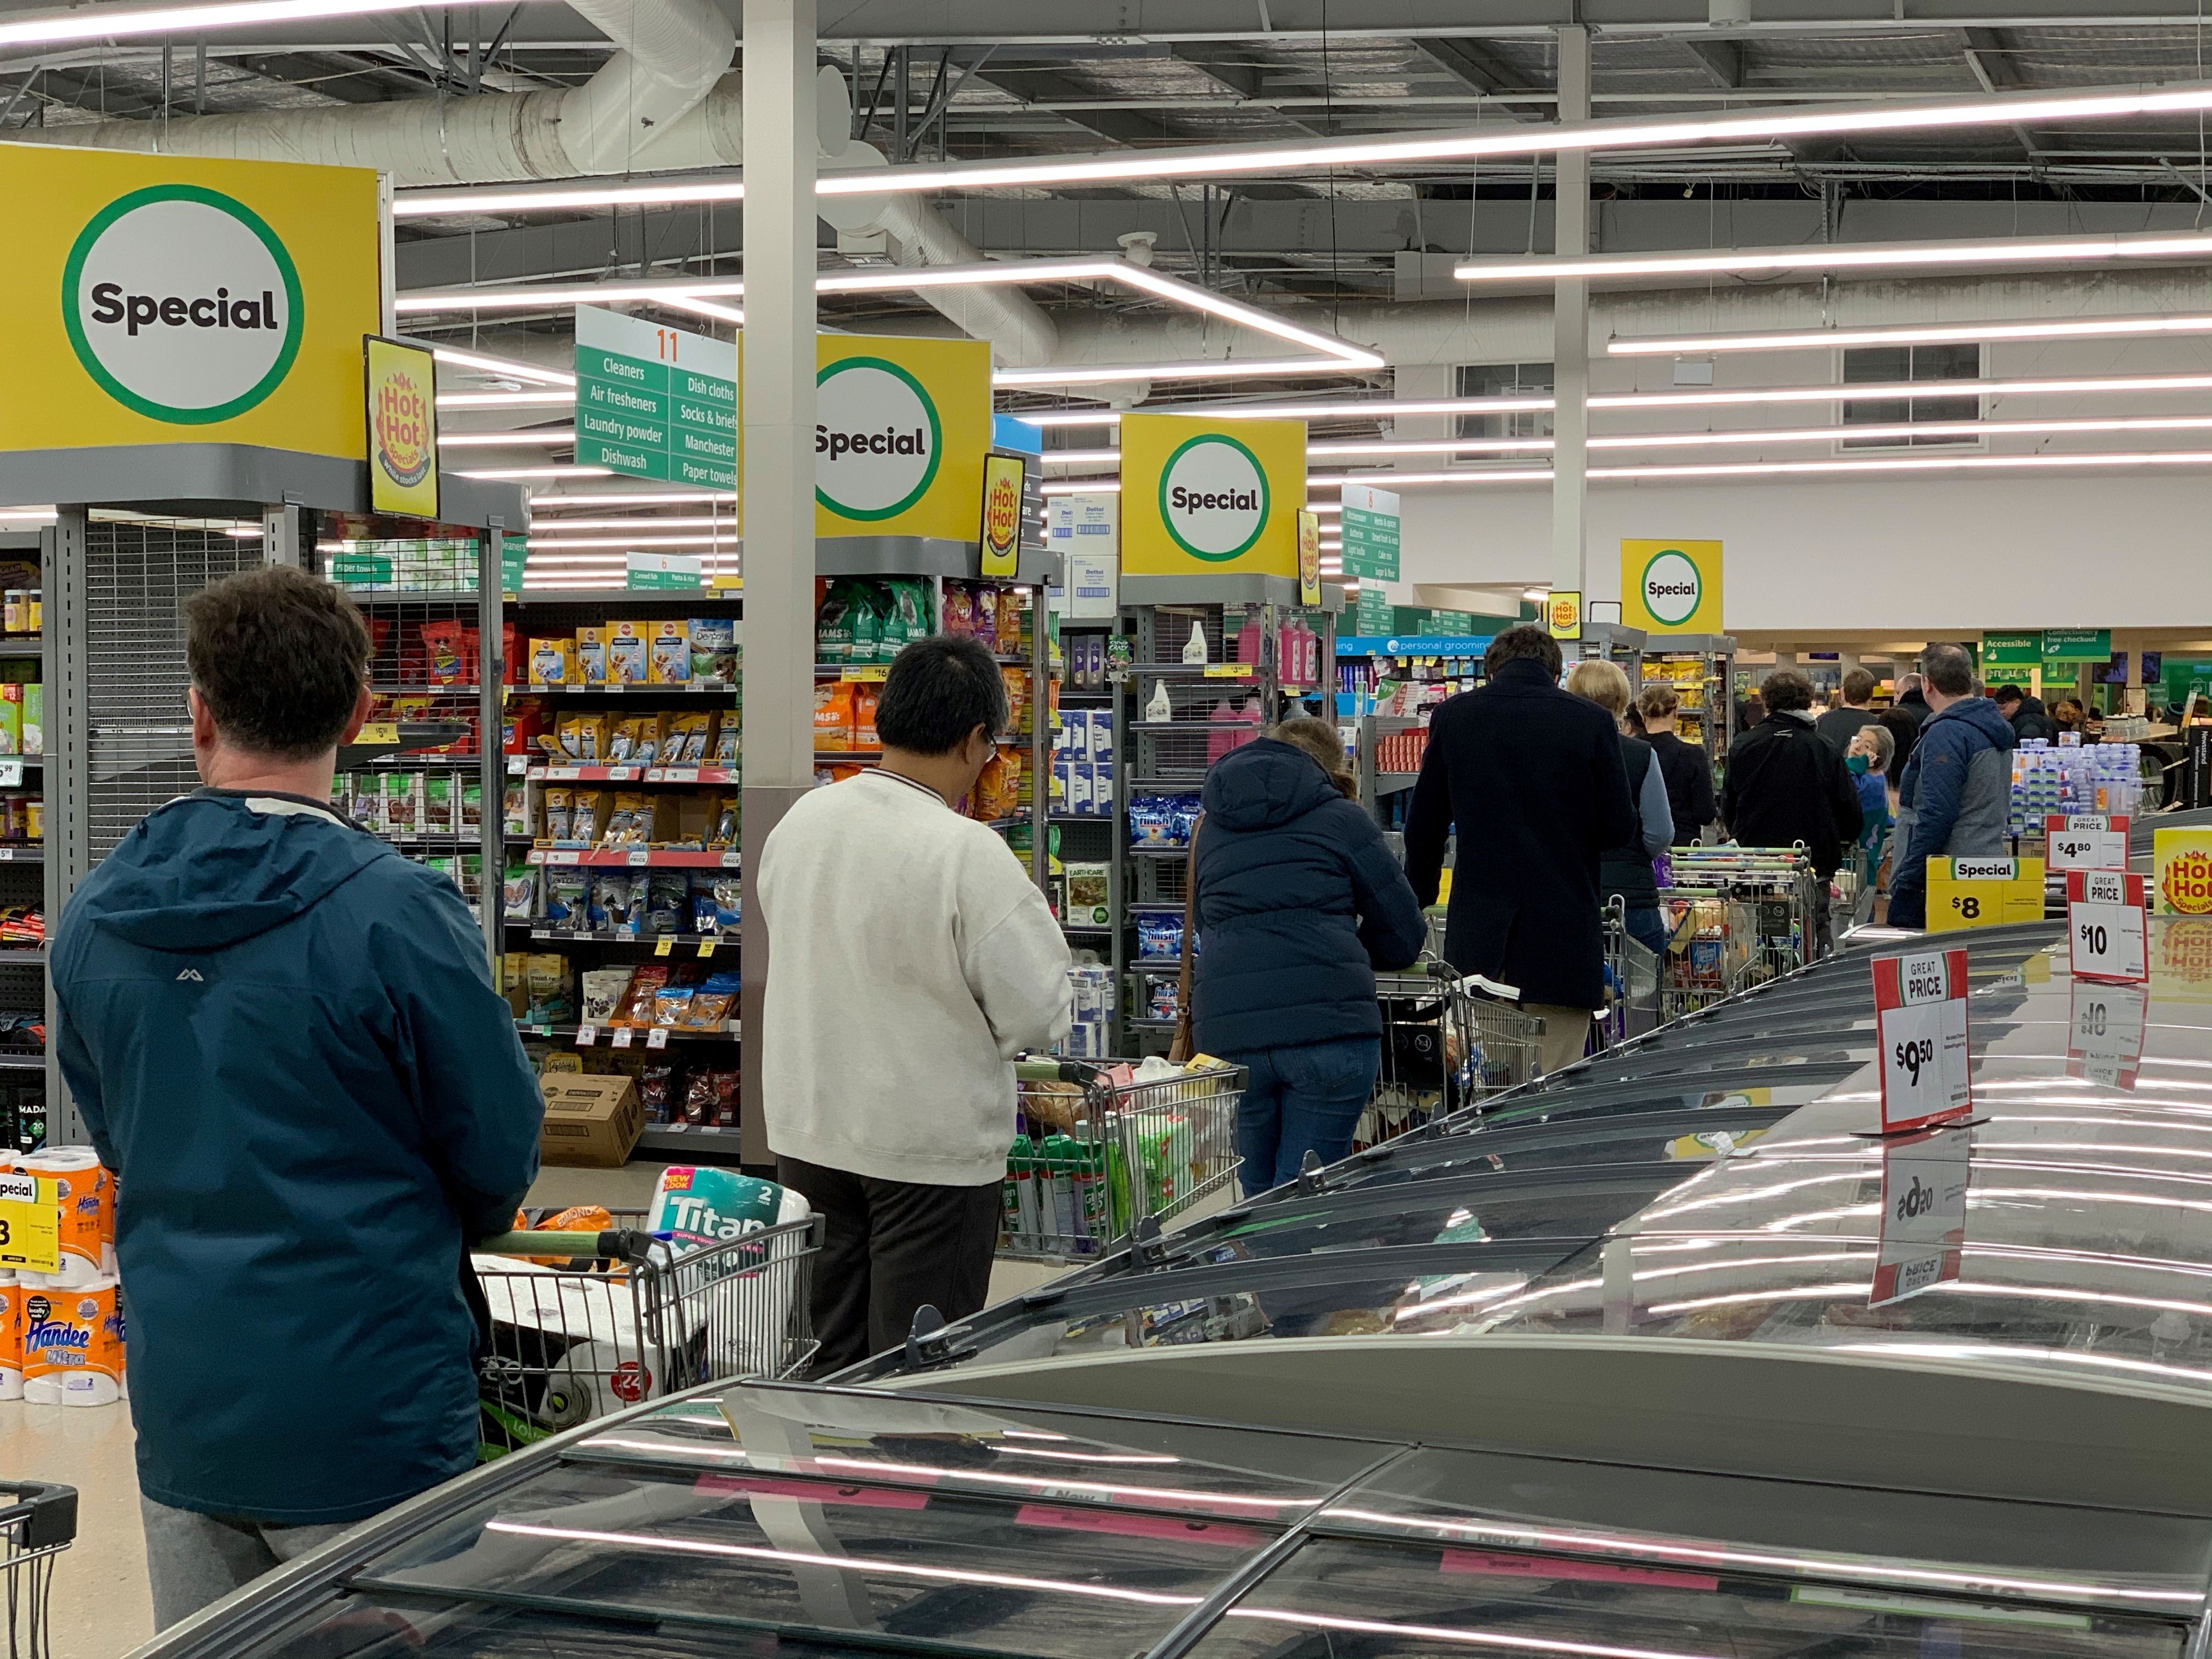 Shoppers shop at a supermarket in the suburb of Johnsonville in Wellington on August 11, 2020. - Auckland has been place at level 3 lockdown and the rest of the country has moved to level 2 after a family in South Auckland tested positive for covid. (Photo by MARTY MELVILLE/AFP via Getty Images)